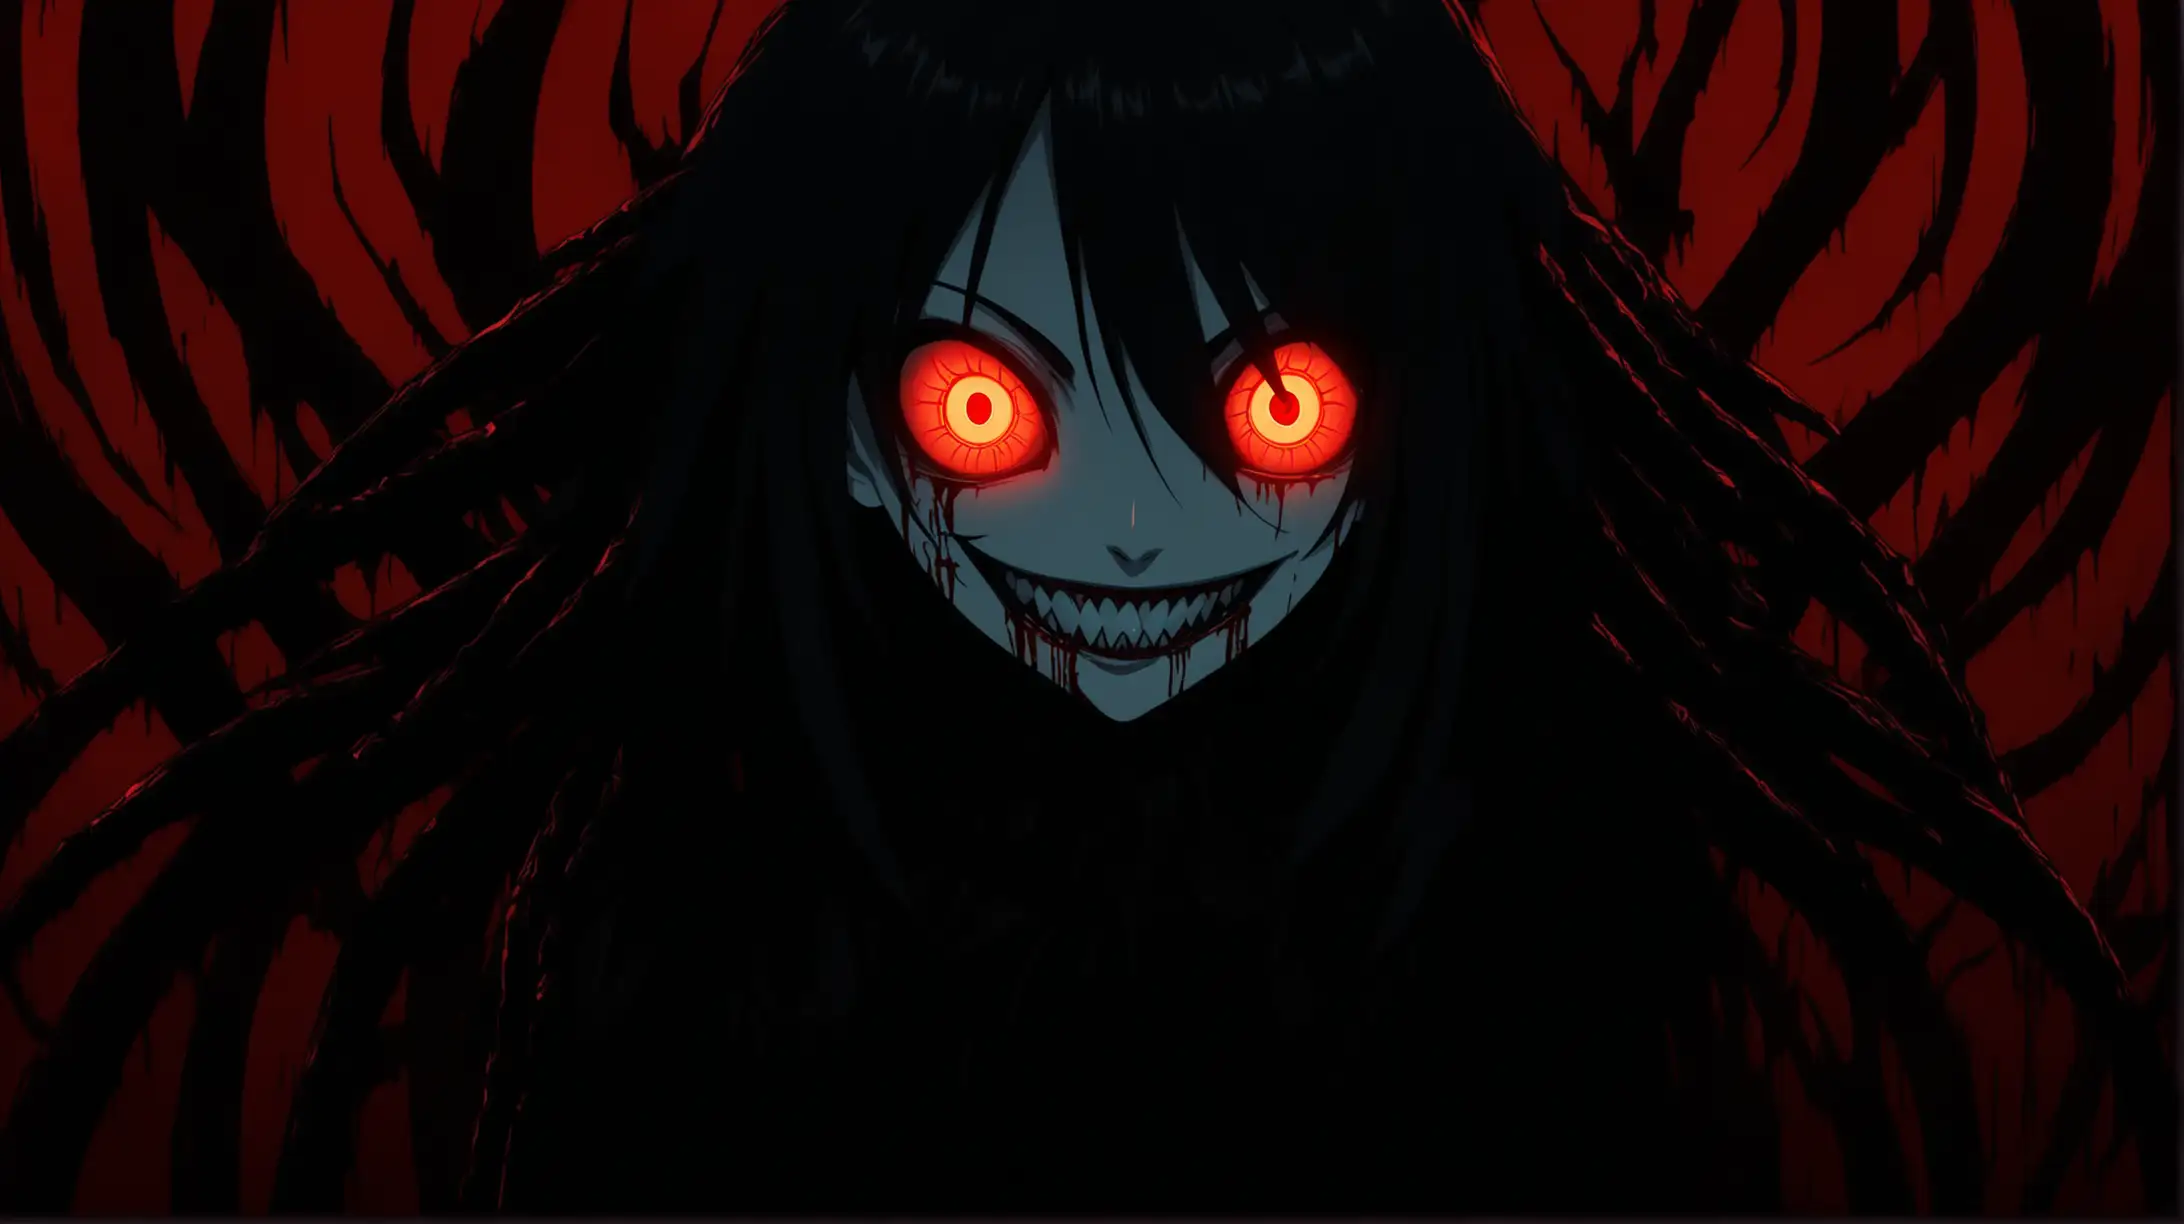 dark foreground, A sinister boy in the anime style smiles maliciously with fanged white teeth, red glowing neon eyes, her huge eyes glow in the dark, she has dark shadows behind her back, on a blood background clean looped, 2d animated art